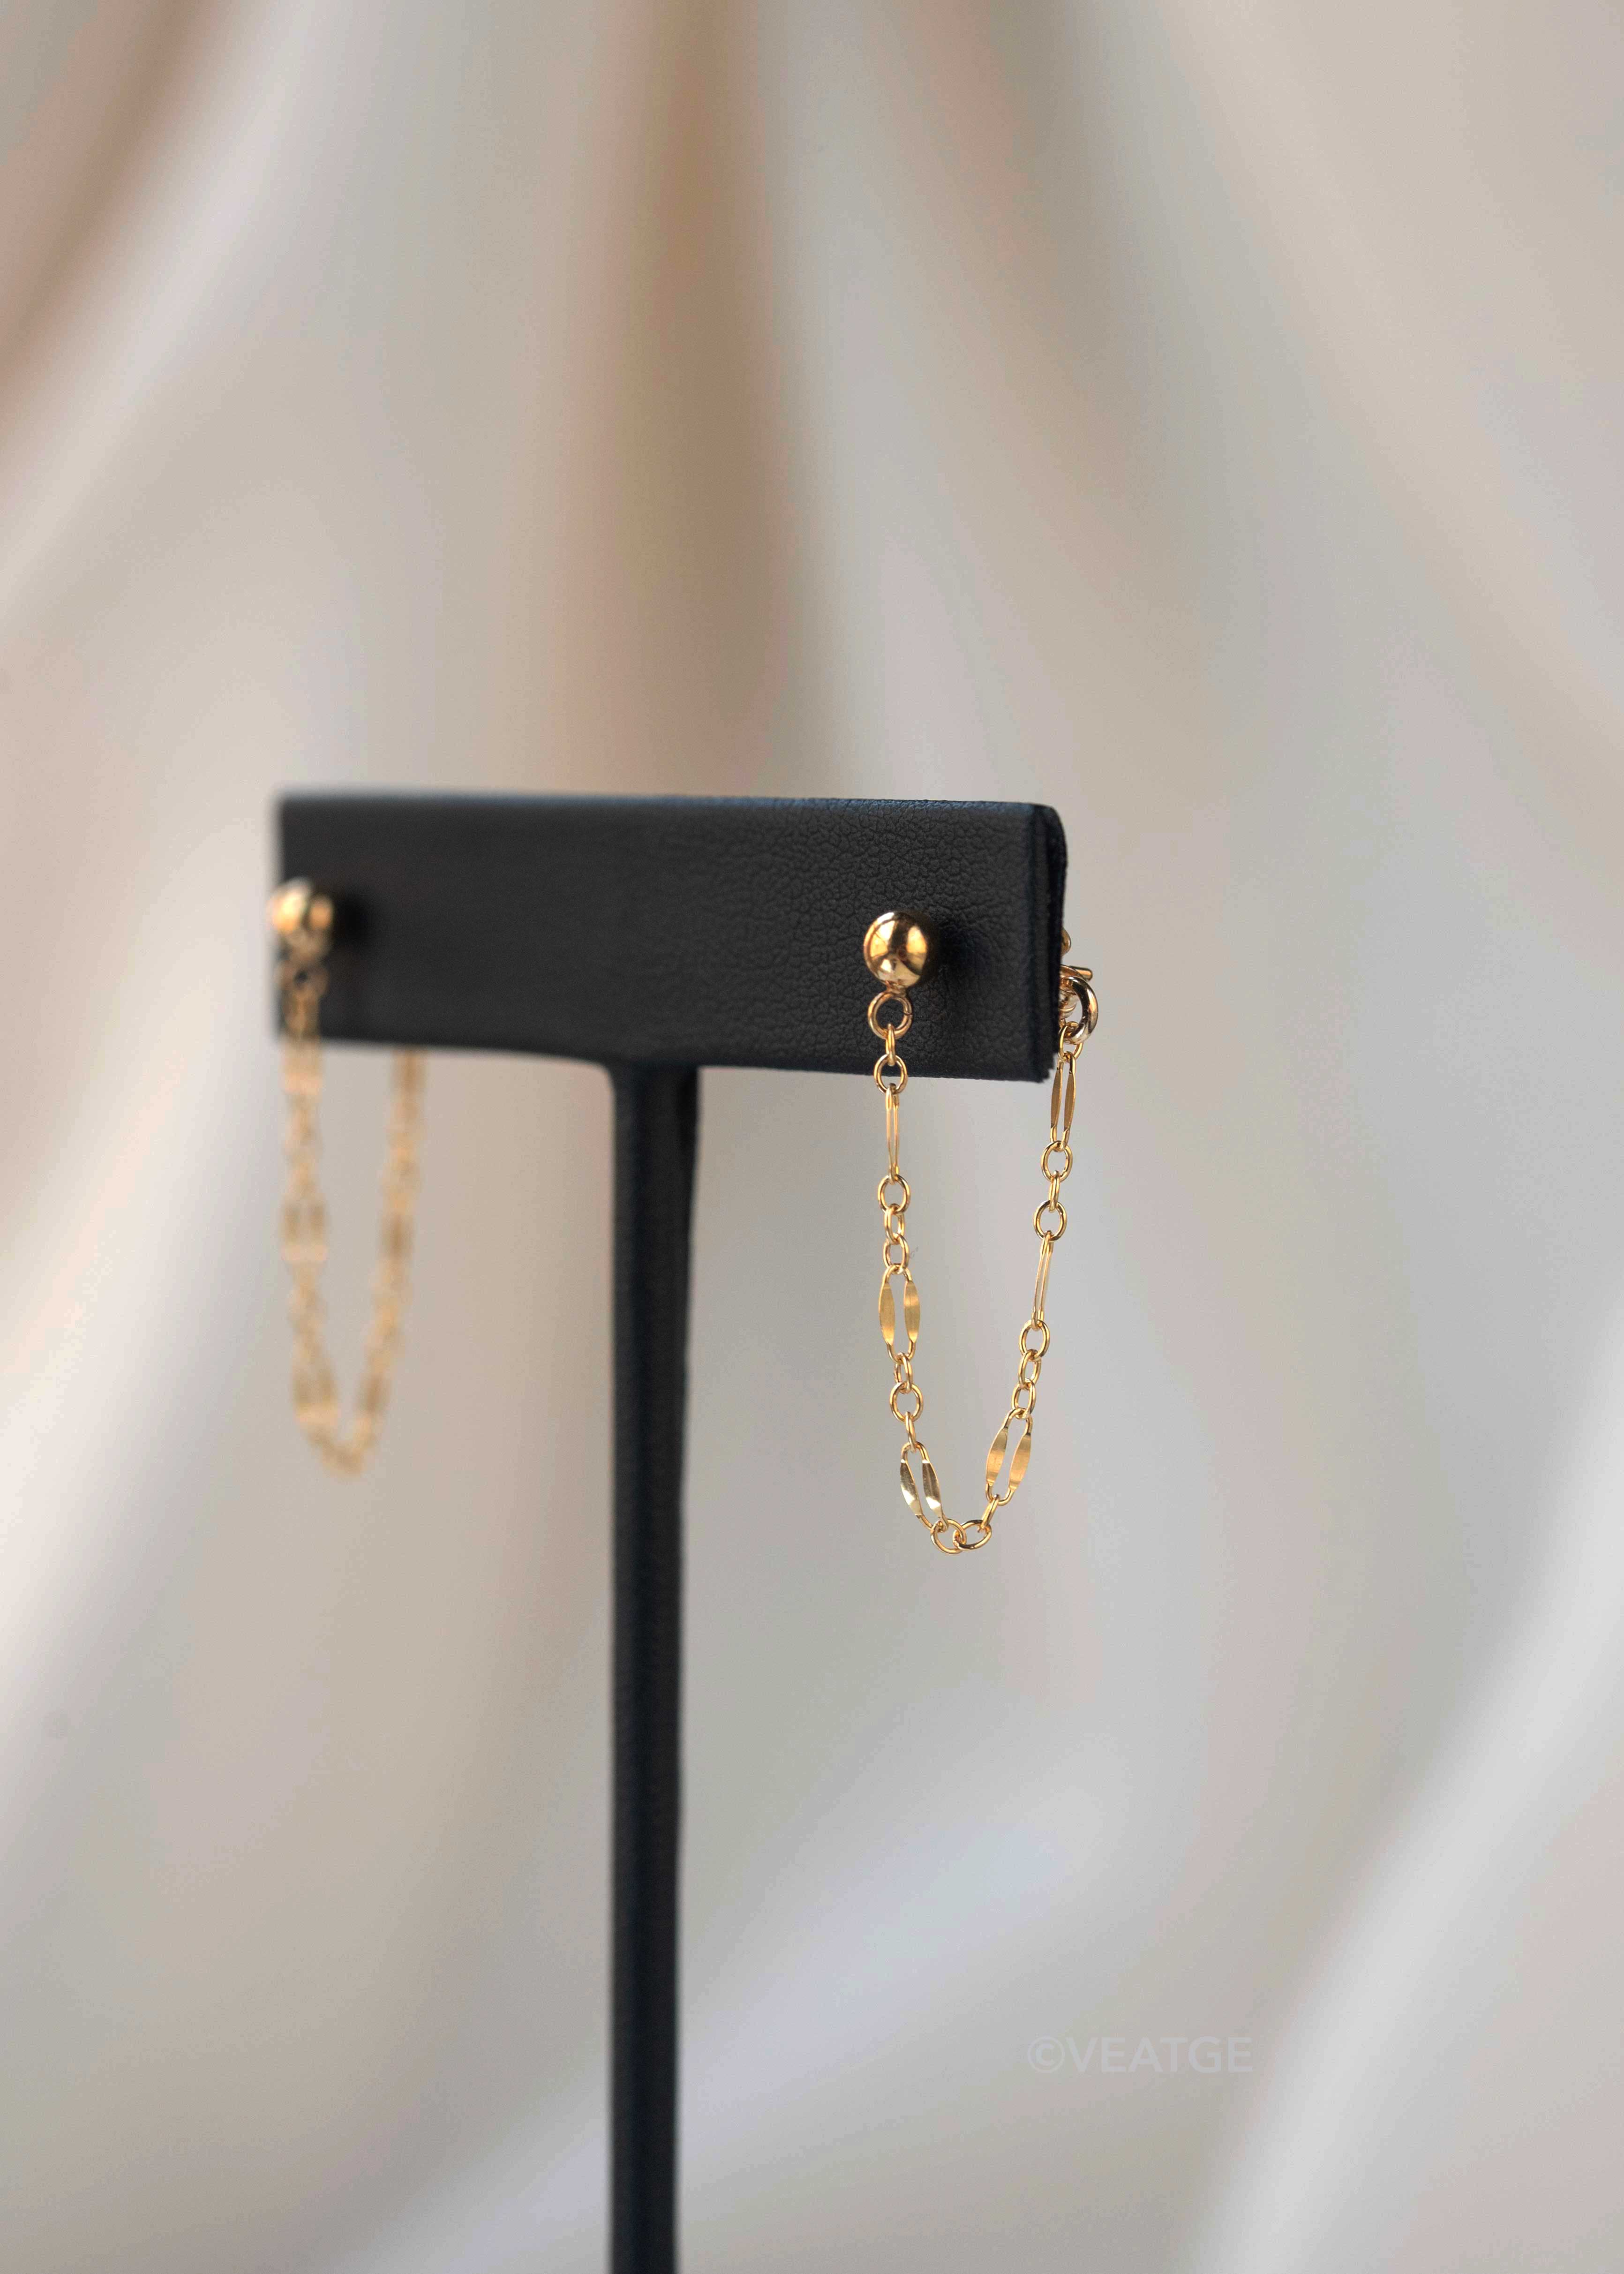 Lace Chain Earrings Gold Hypoallergenic Minimal Continuous